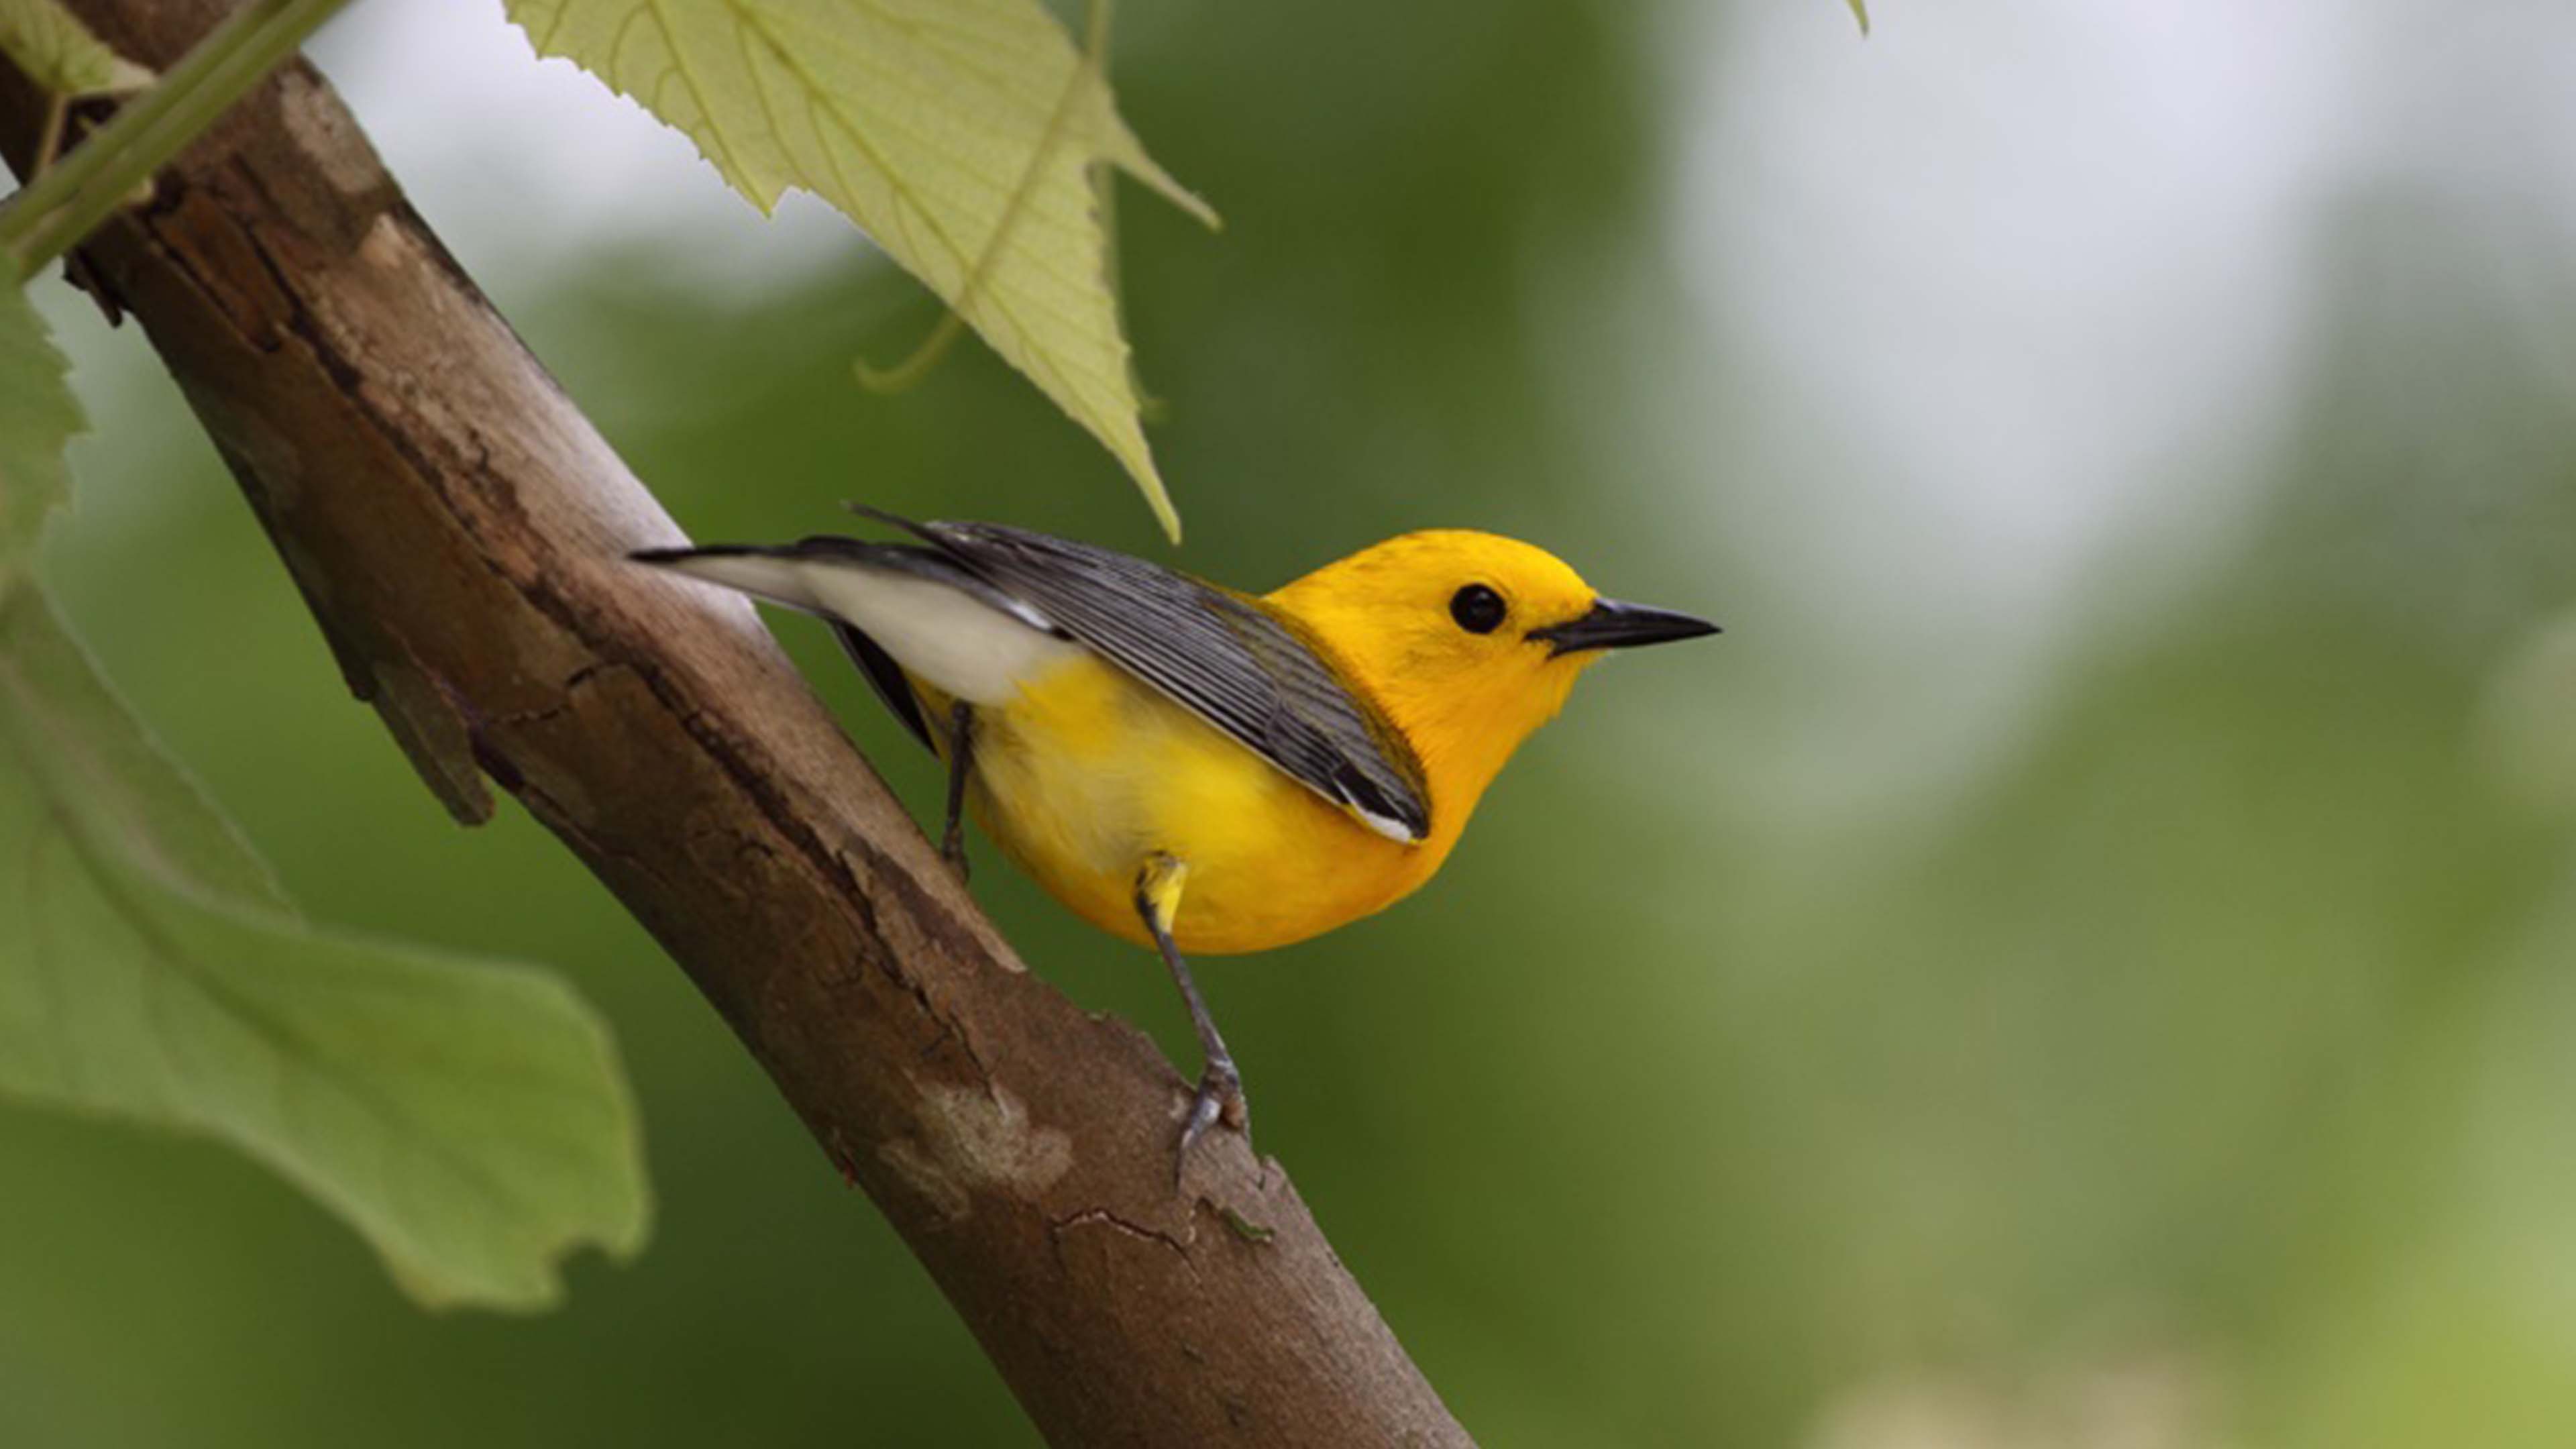 Prothonotary warbler perched on a branch amid green foliage